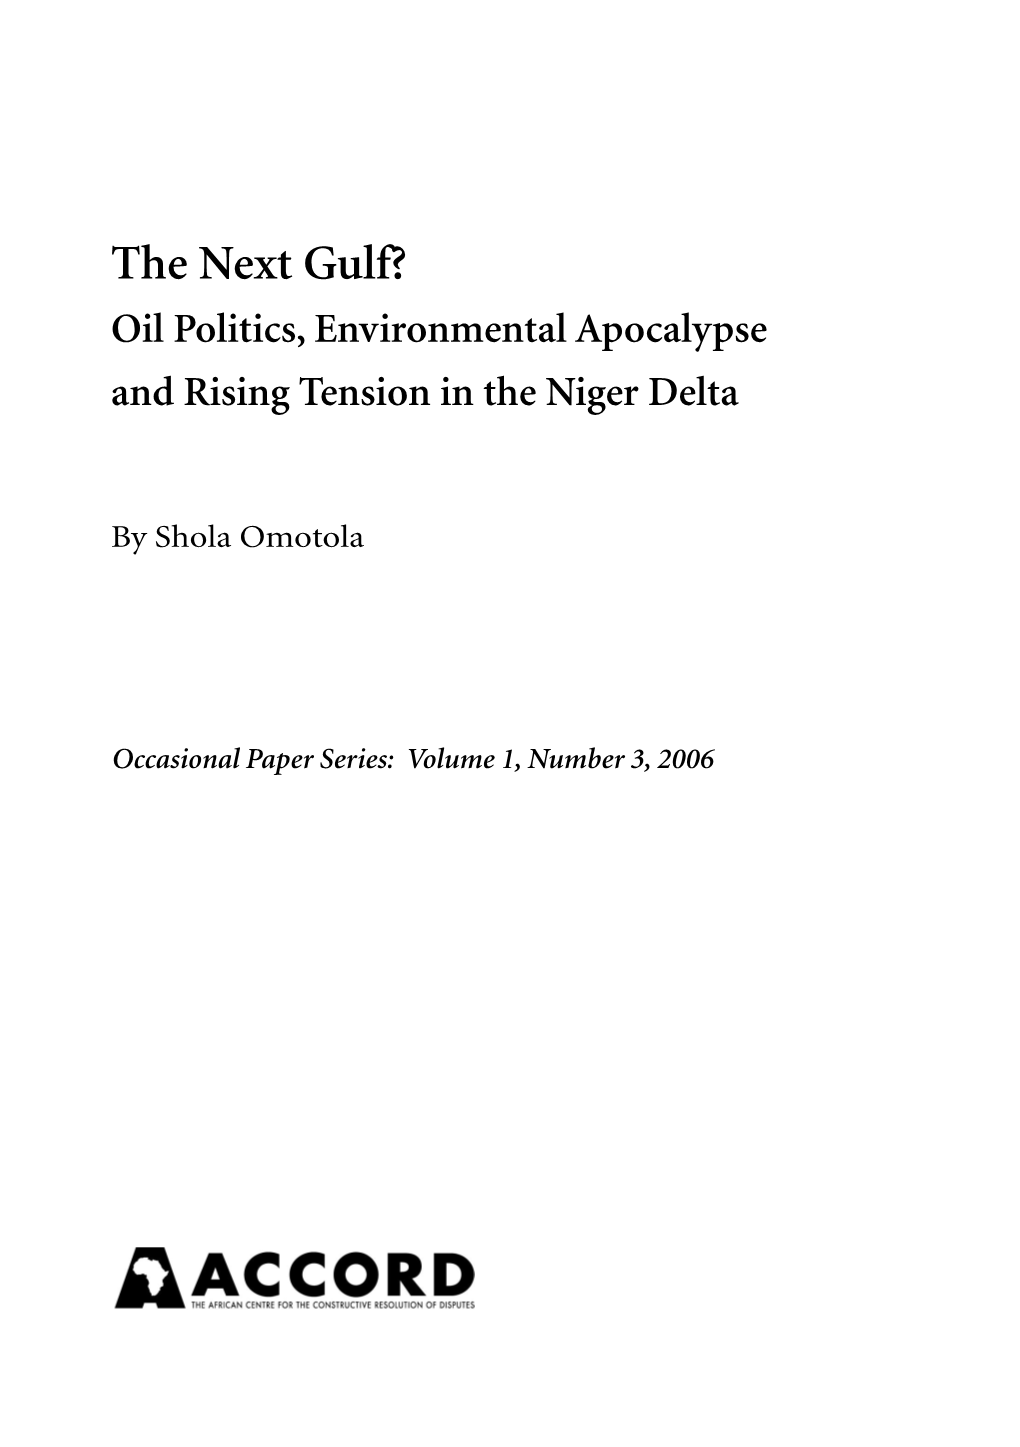 The Next Gulf? Oil Politics, Environmental Apocalypse and Rising Tension in the Niger Delta